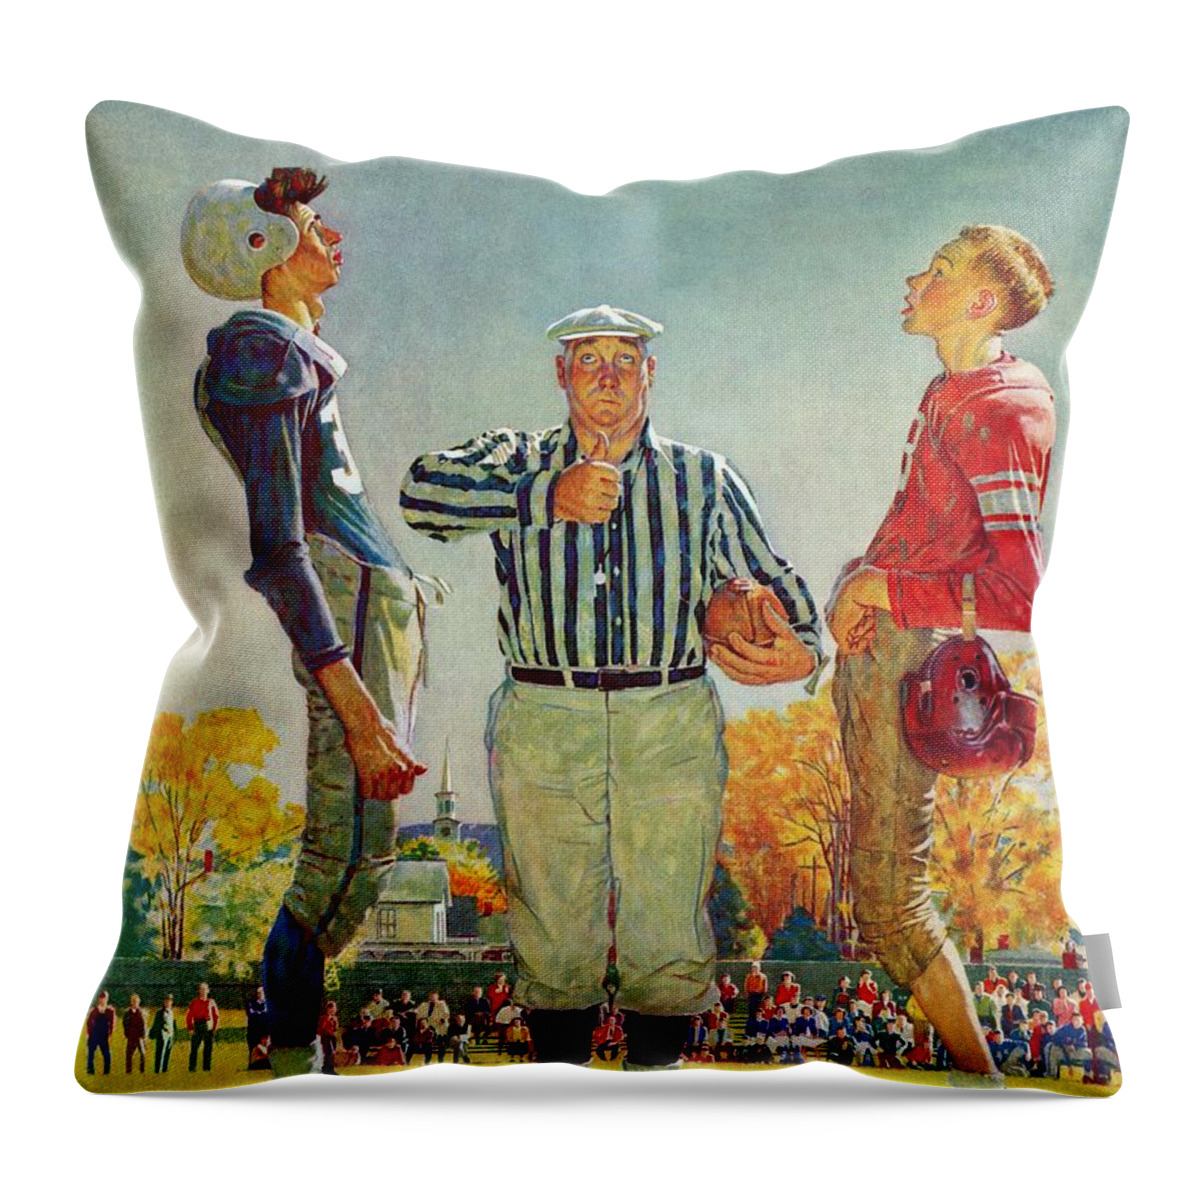 Coins Throw Pillow featuring the painting Coin Toss by Norman Rockwell